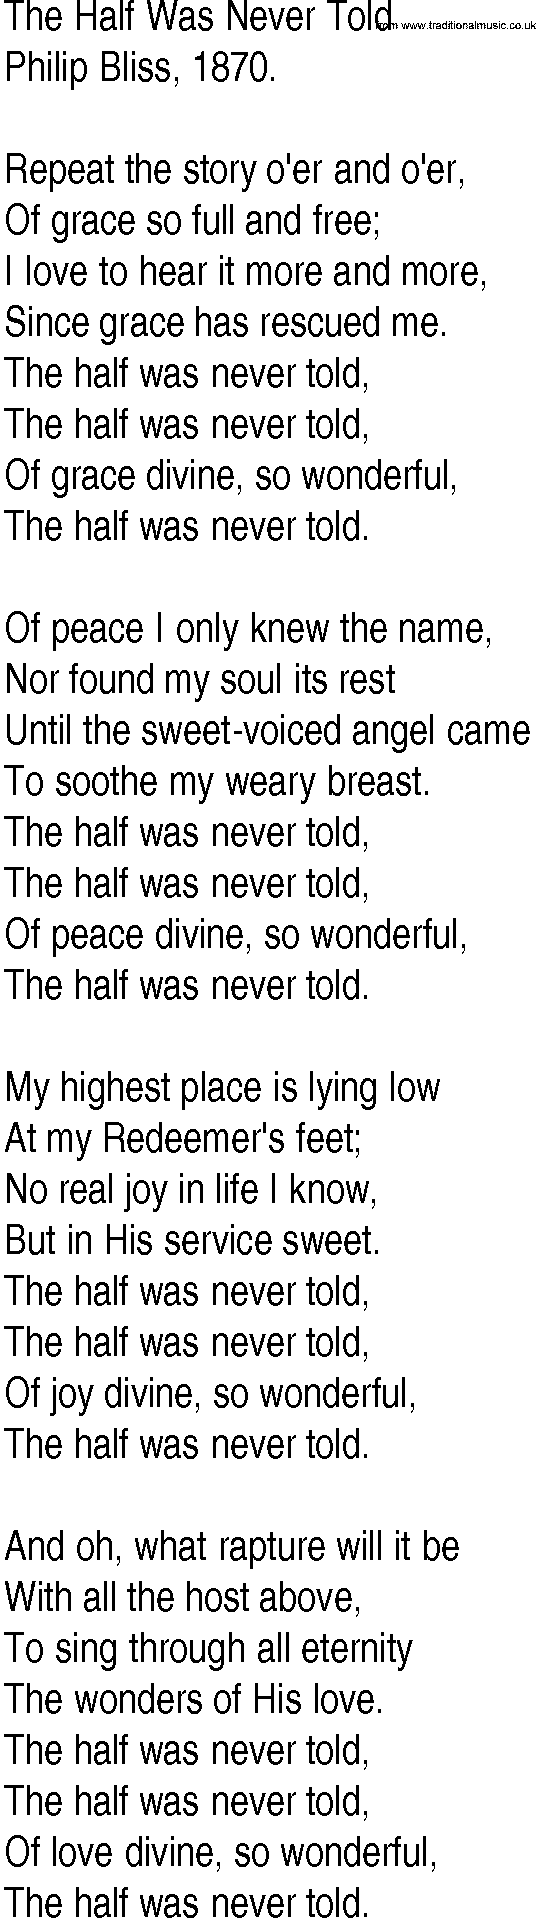 Hymn and Gospel Song: The Half Was Never Told by Philip Bliss lyrics